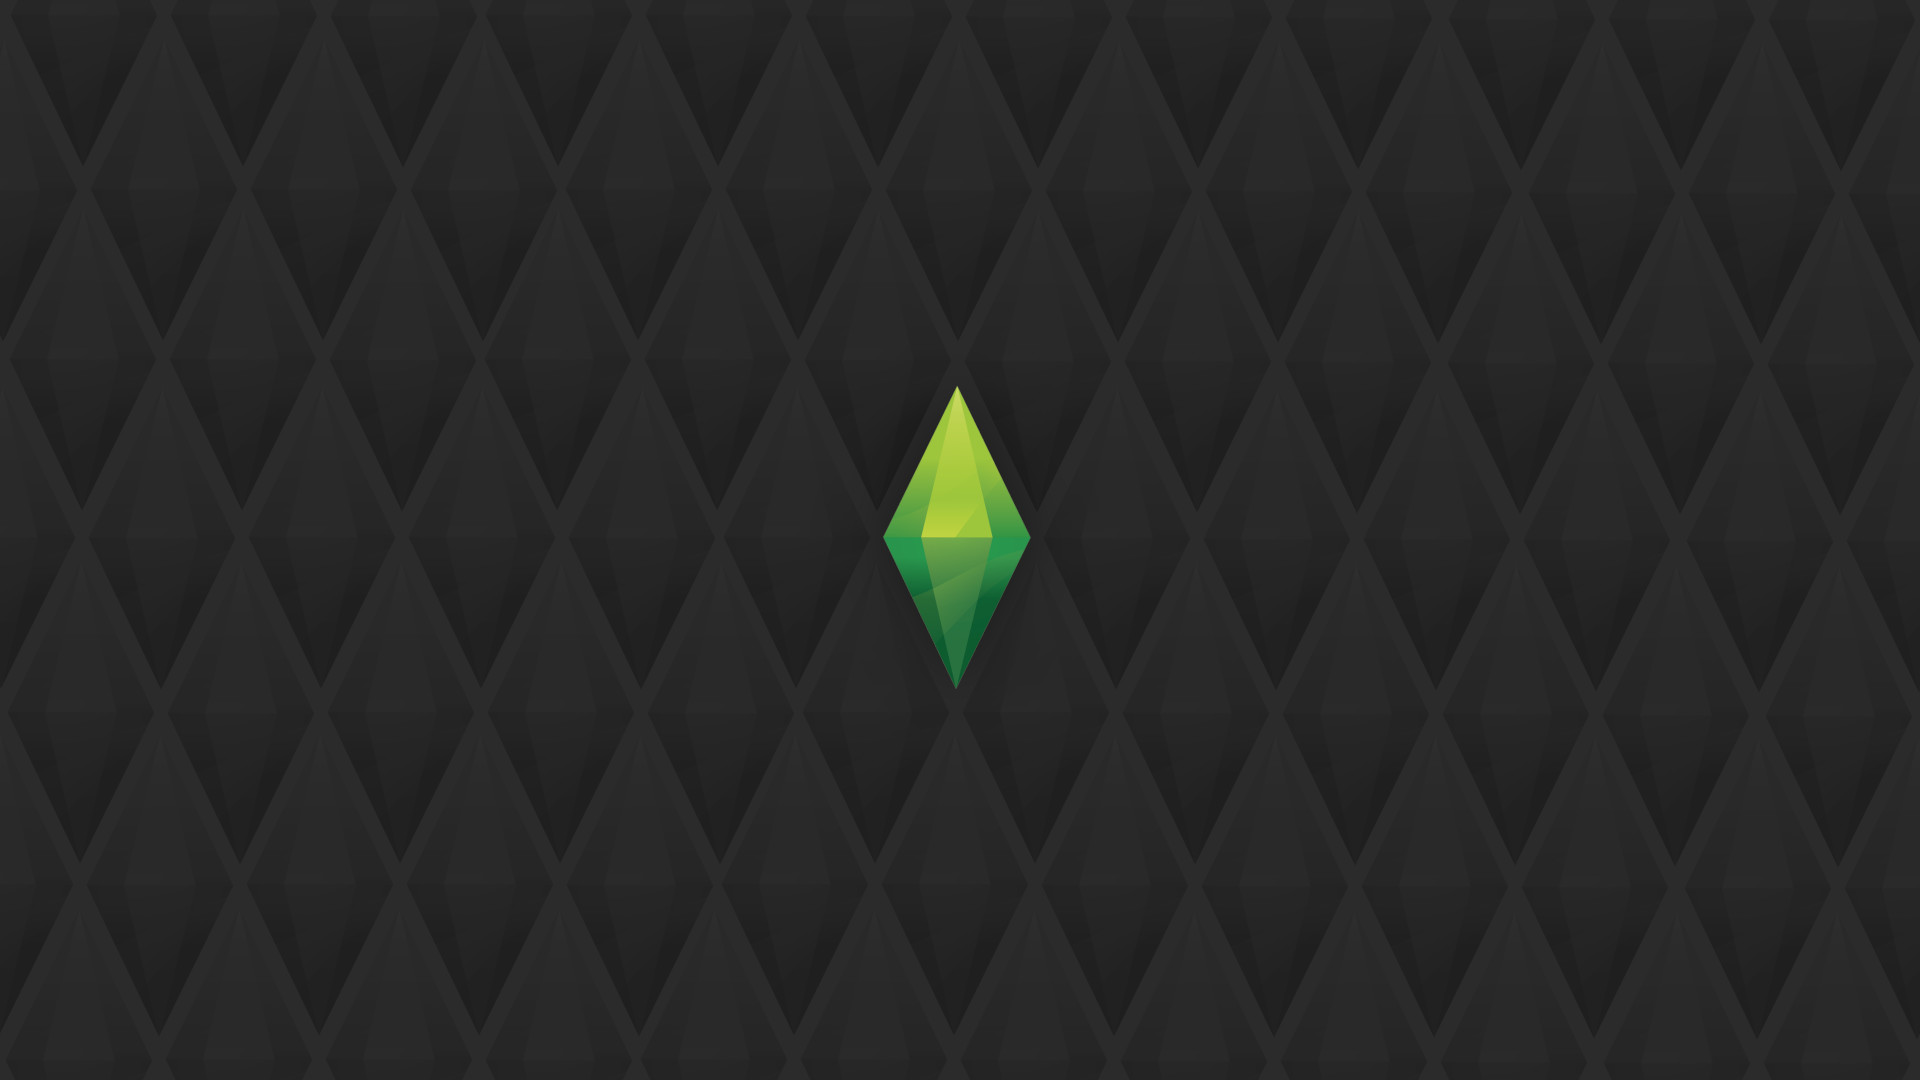 1920x1080 I made a simple dark themes sims wallpaper for myself and figured I'd share.